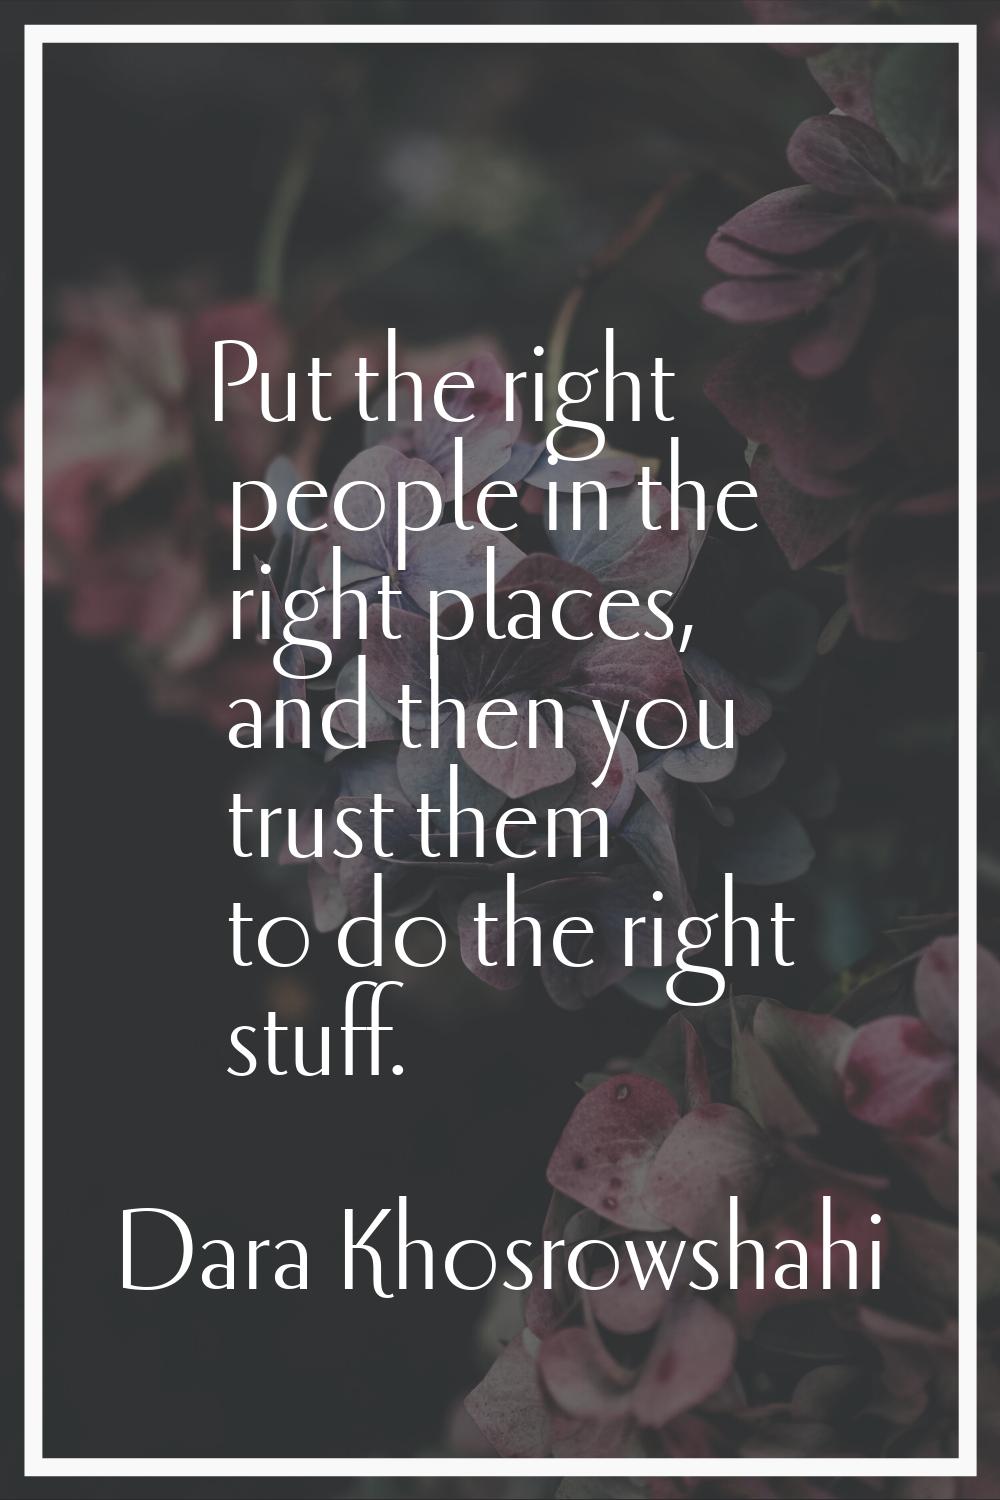 Put the right people in the right places, and then you trust them to do the right stuff.